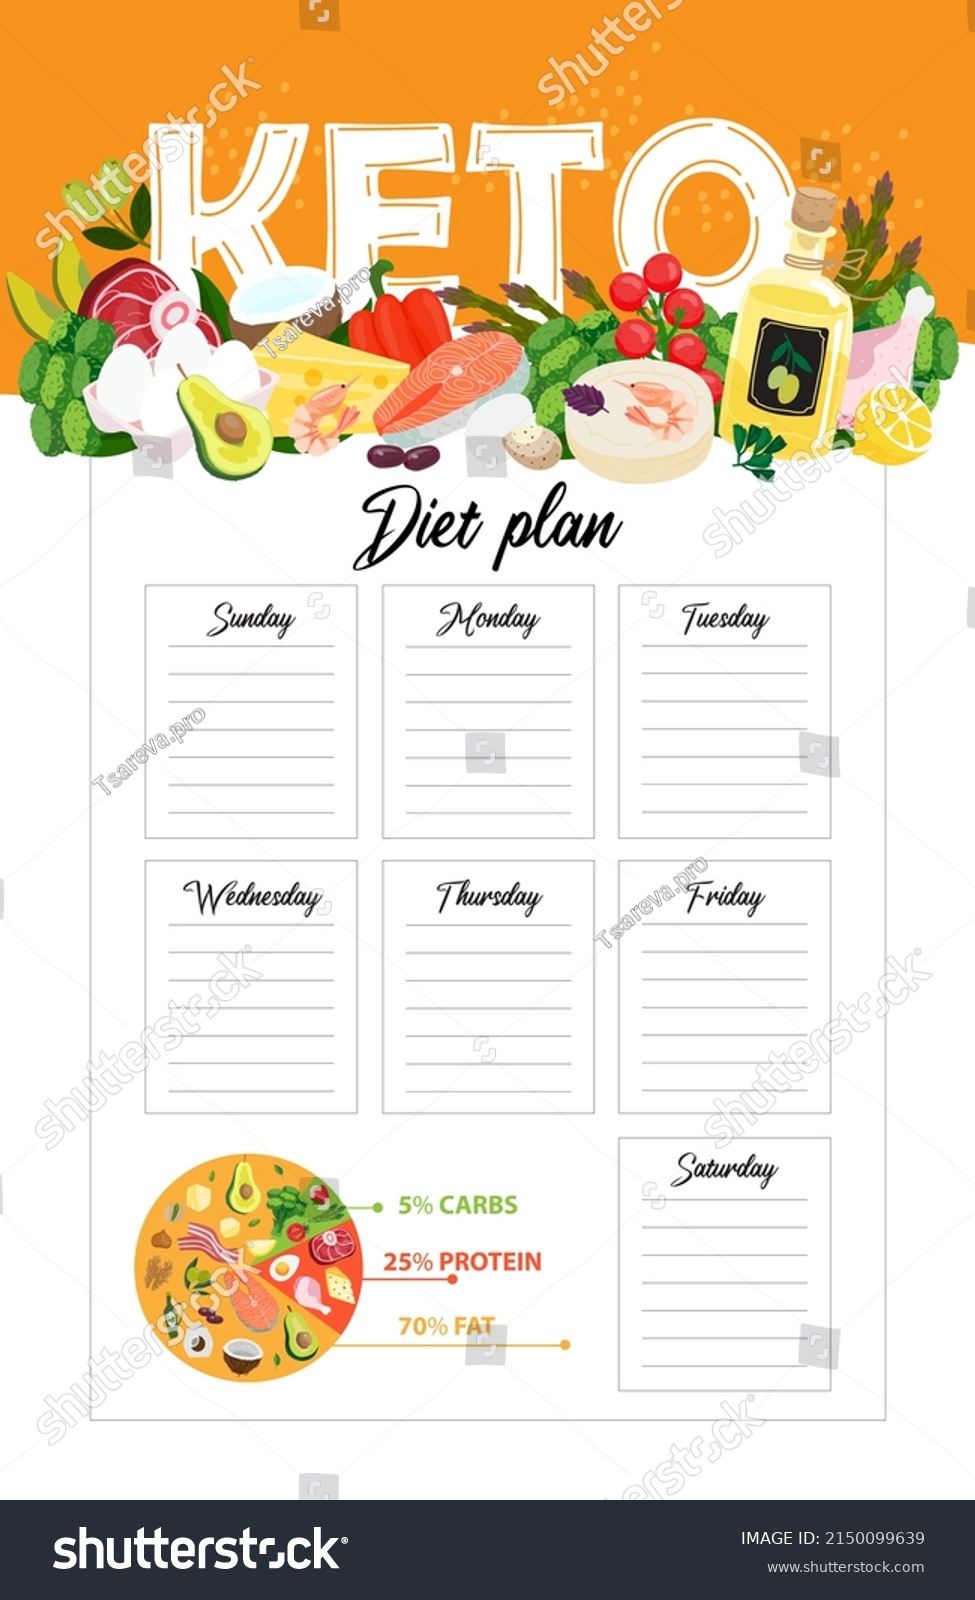 Keto diet meal plan template. Vector illustration of a weekly ketogenic diet meal plan for each day to record food and meals with low carbs high fat with pie chart reminder. Keto diary
 #2150099639